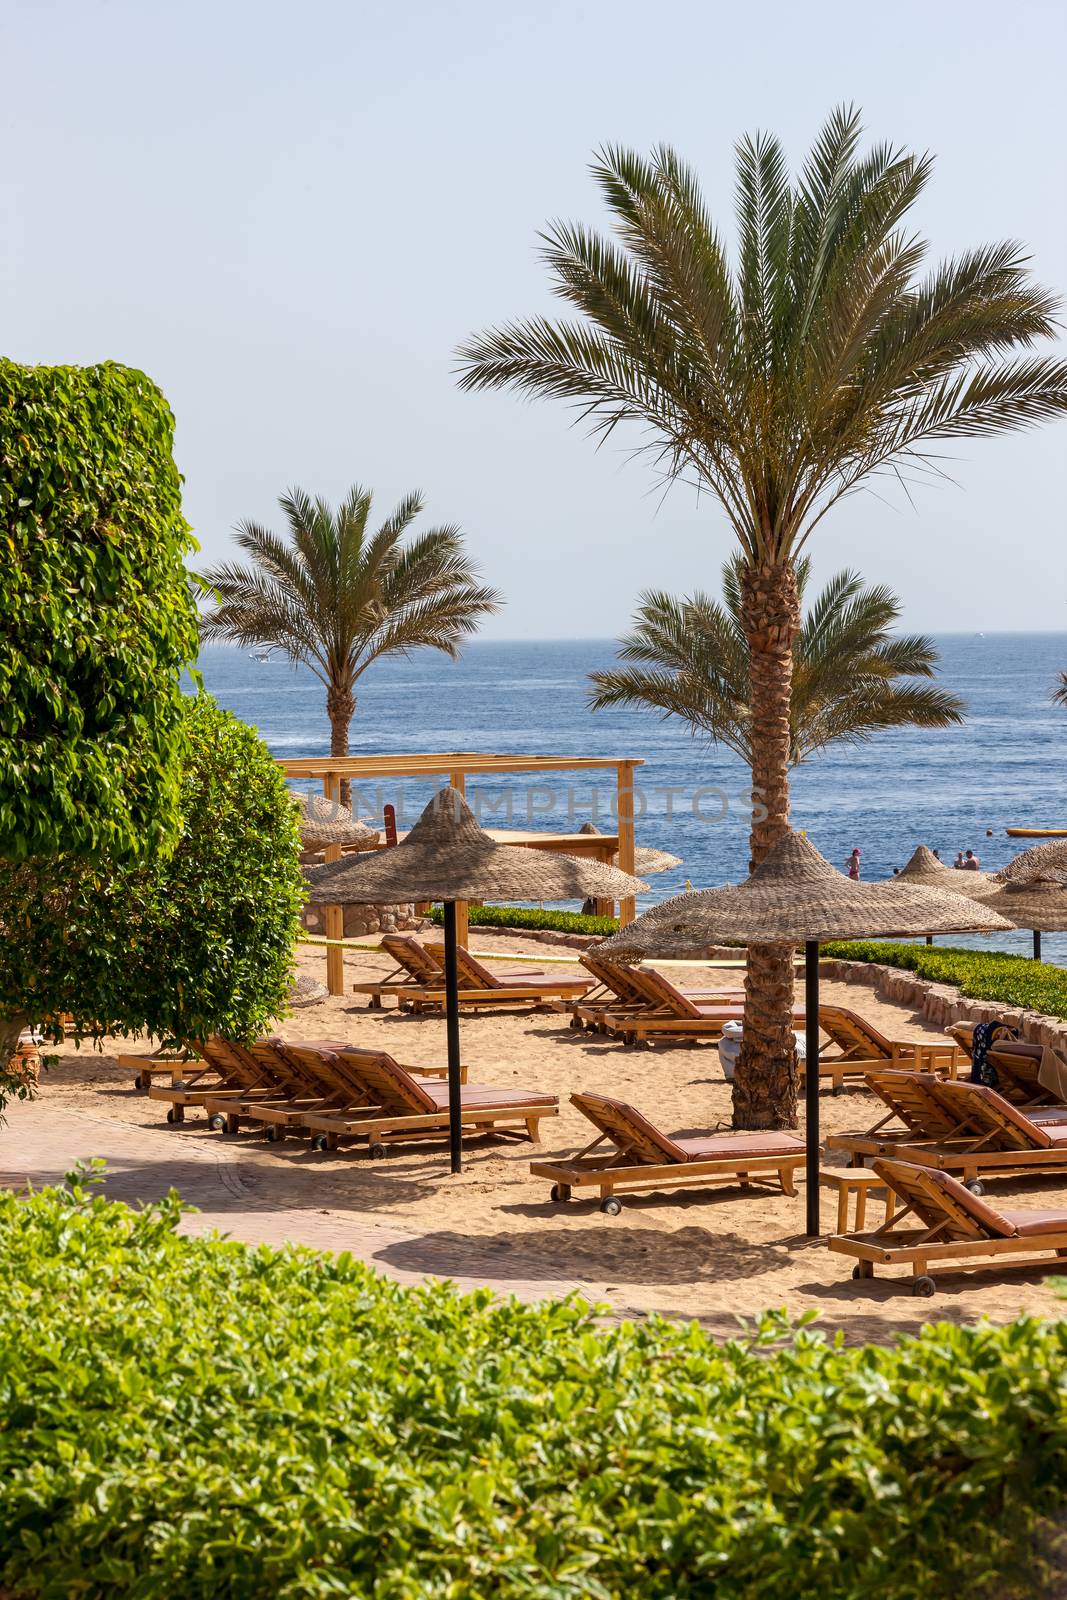 Palm alley on egyptian sand beach, umbrellas and sun loungers and  view at Red Sea. Egypt